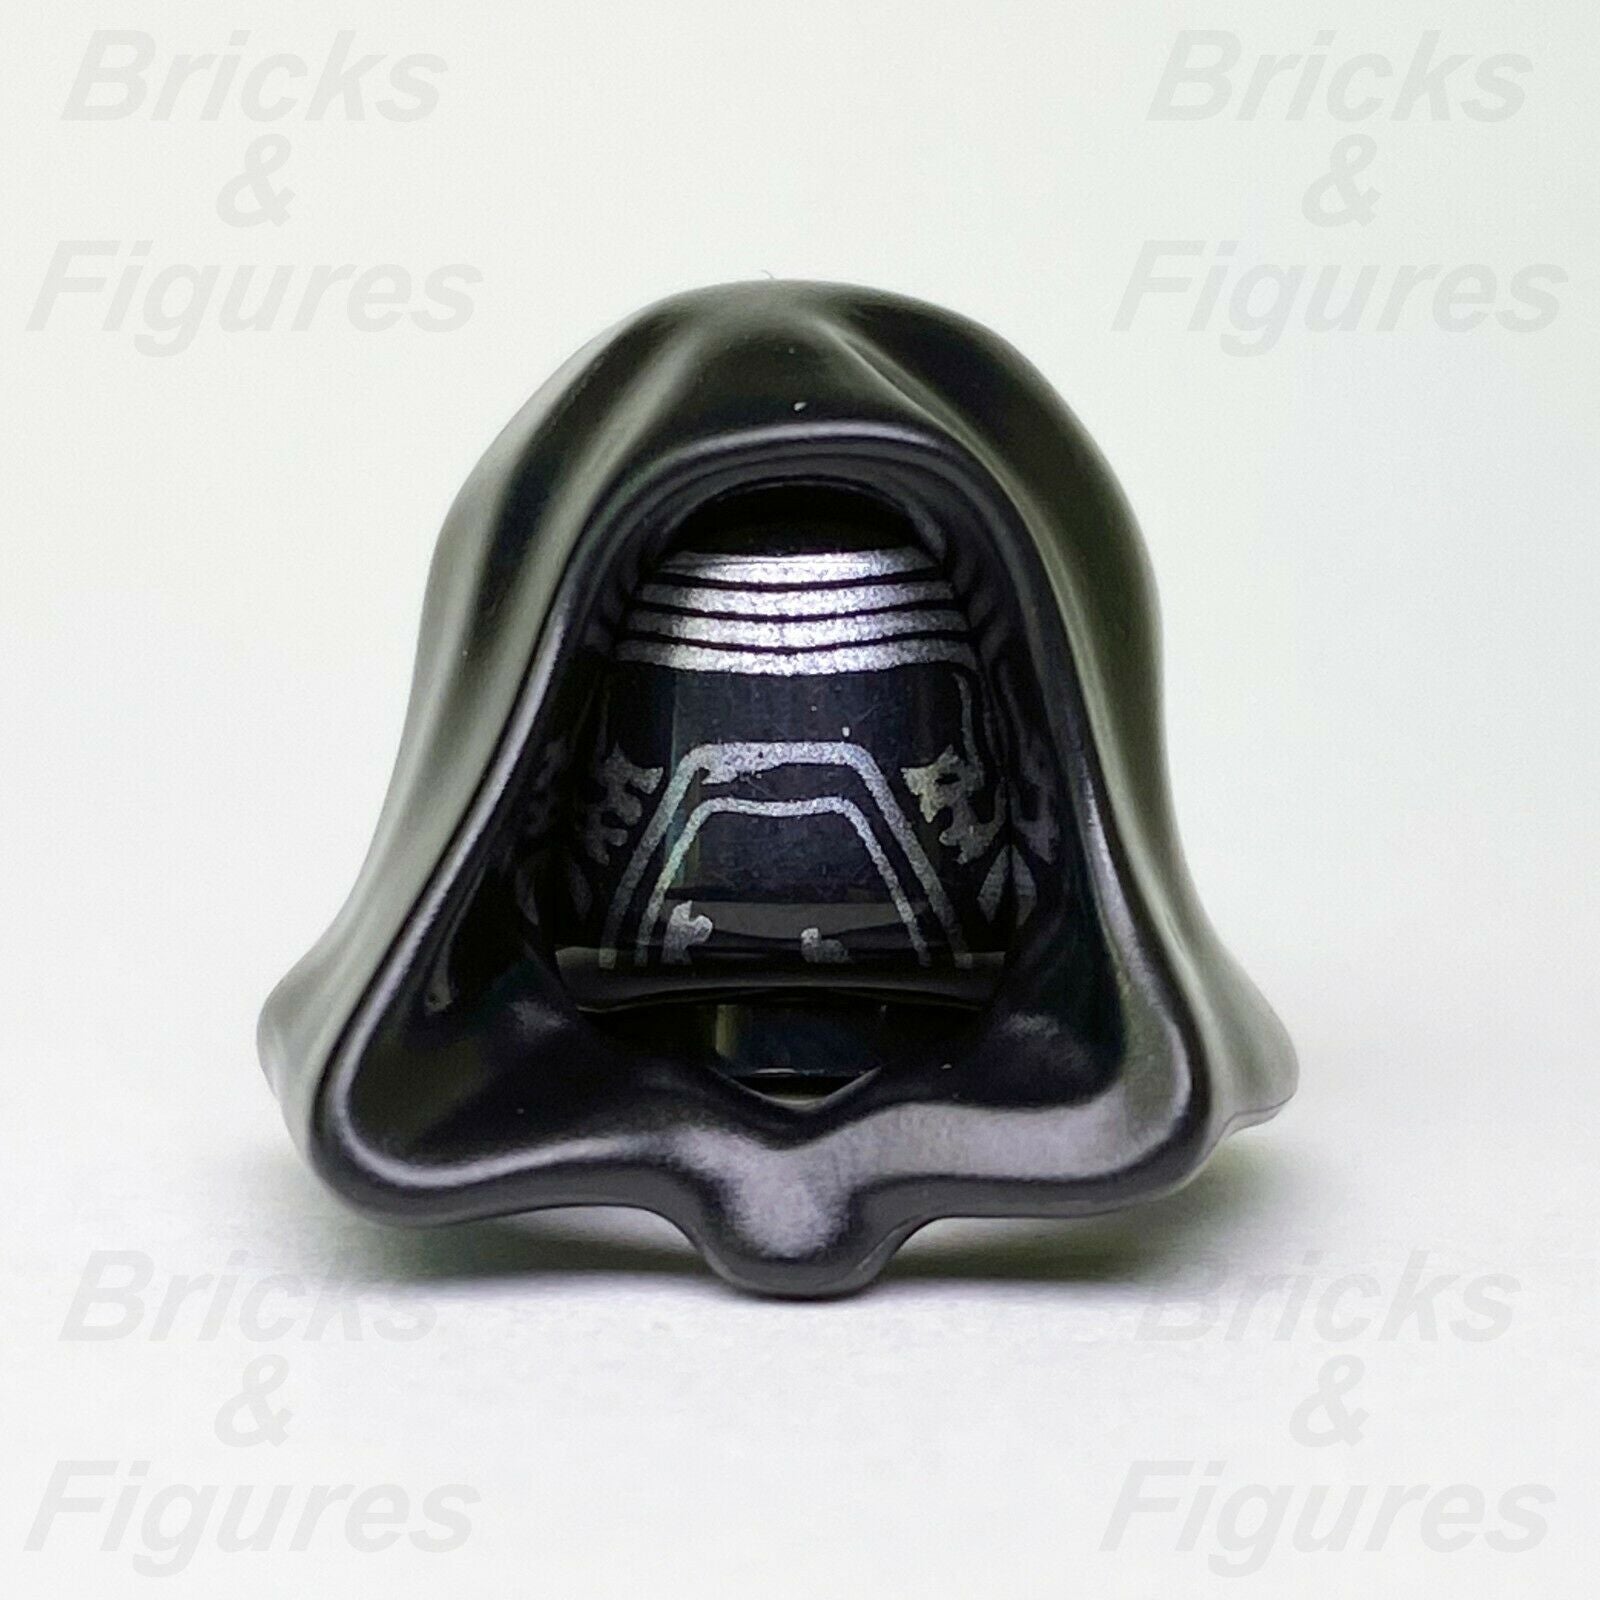 New Star Wars LEGO® Kylo Ren's Sith Mask with Black Hood First Order 75104 - Bricks & Figures